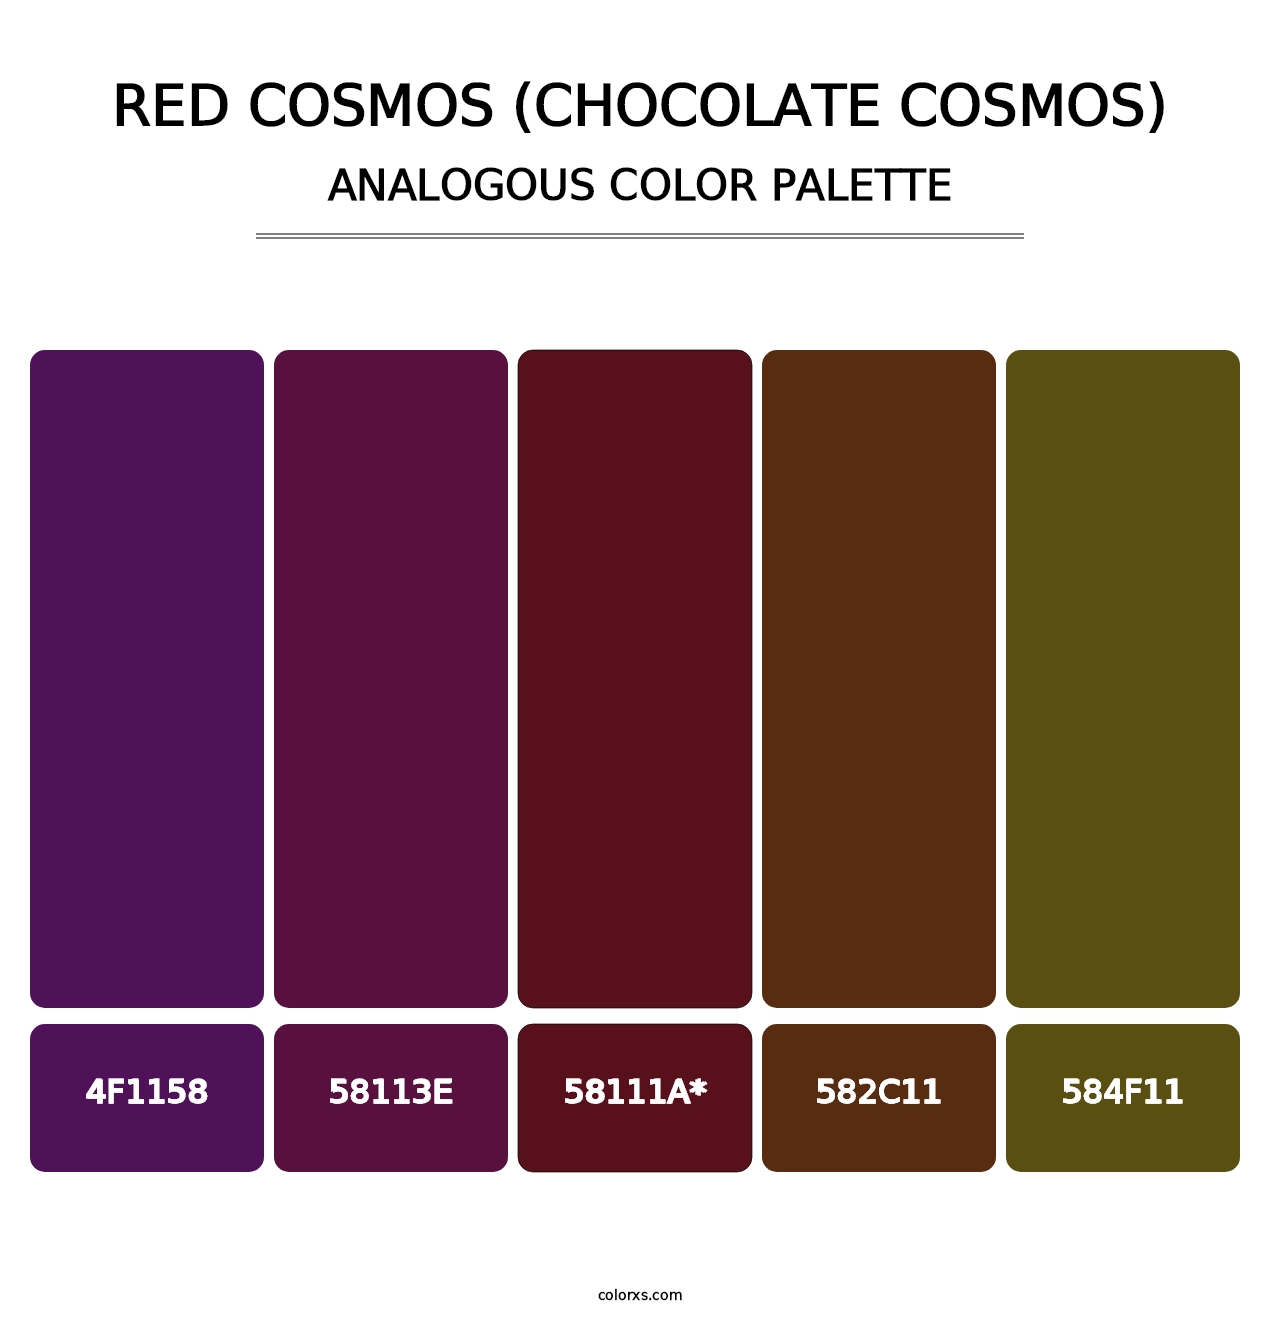 Red Cosmos (Chocolate Cosmos) - Analogous Color Palette